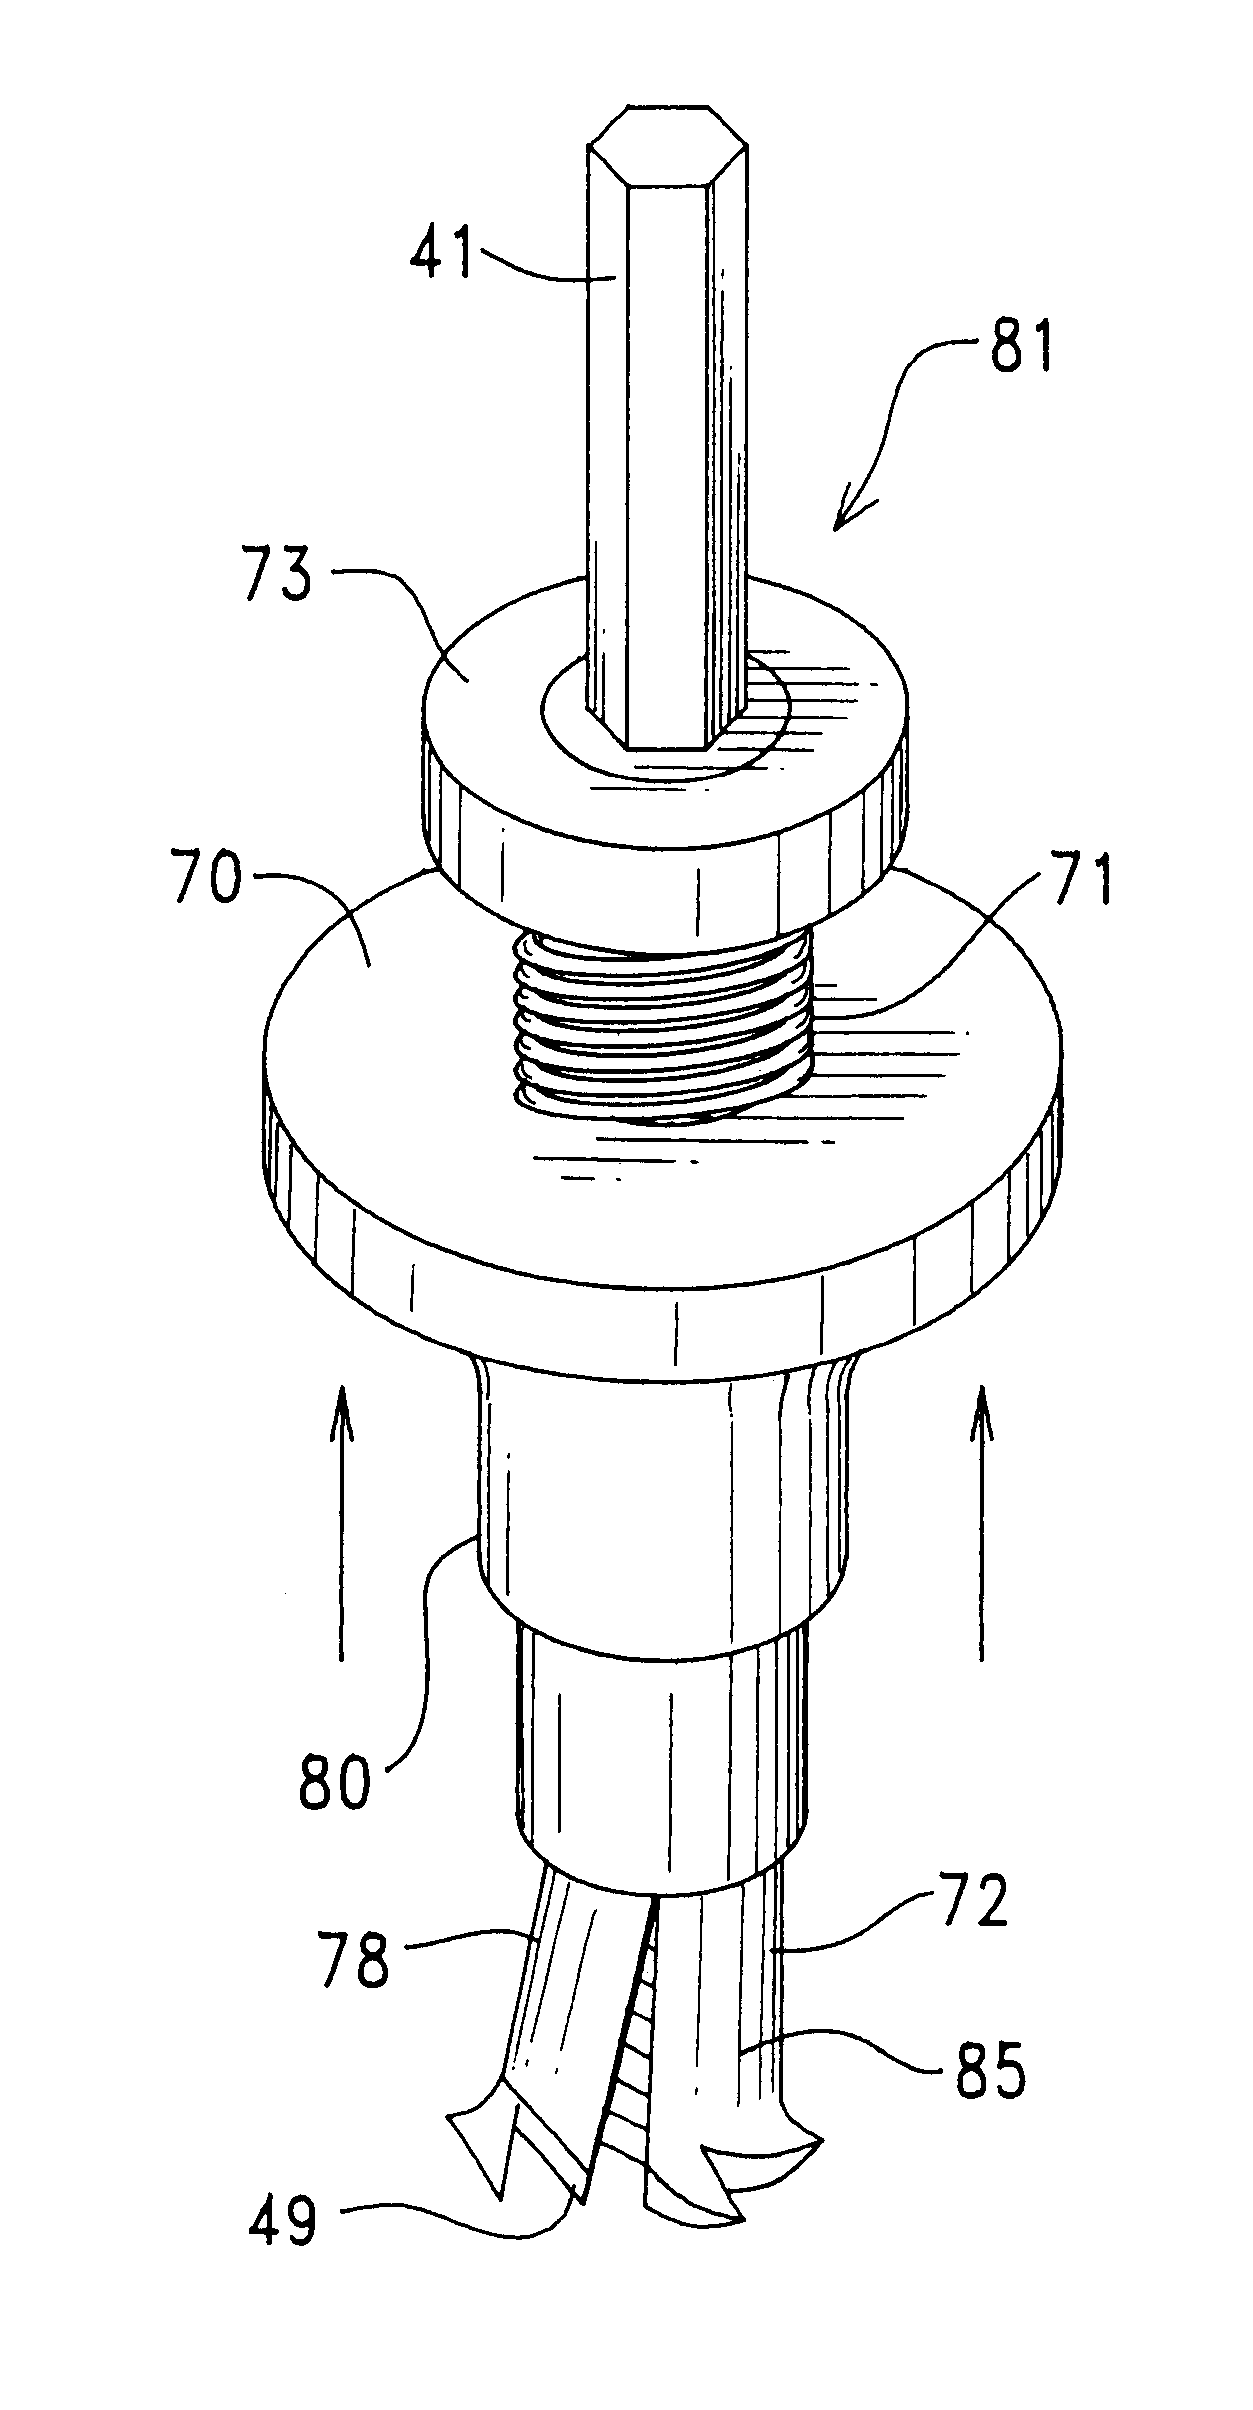 Apparatus for extracting fasteners from a host material